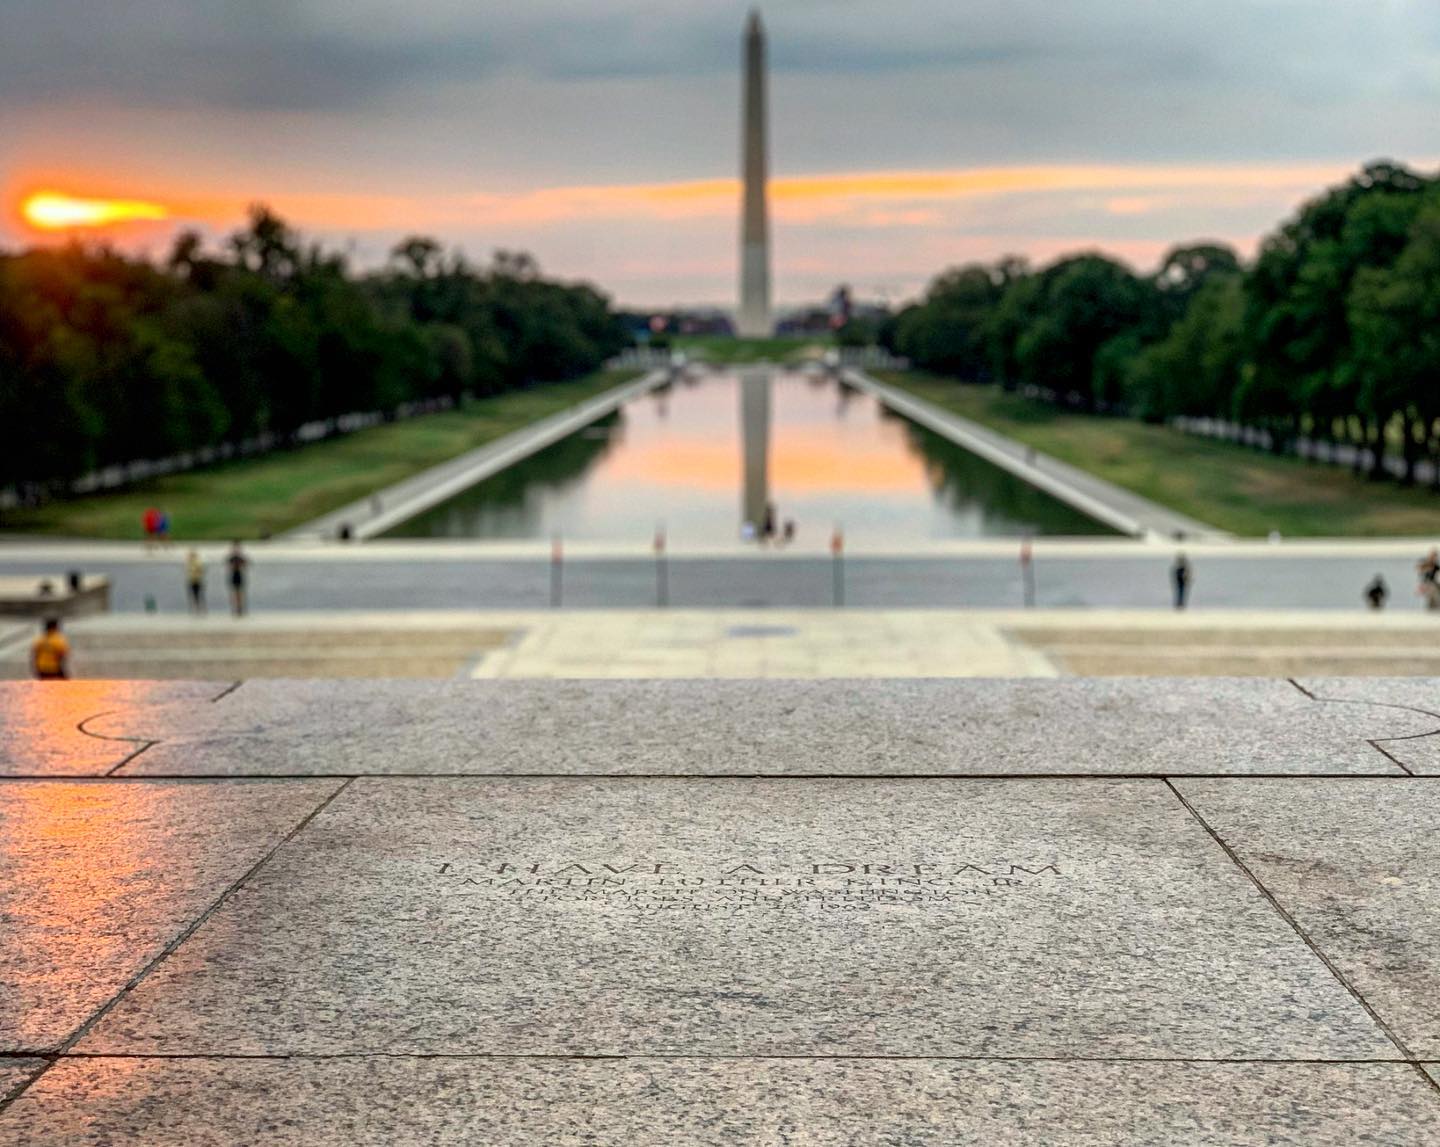 @jennymagee79 - Lincoln Memorial Steps 'I Have a Dream'